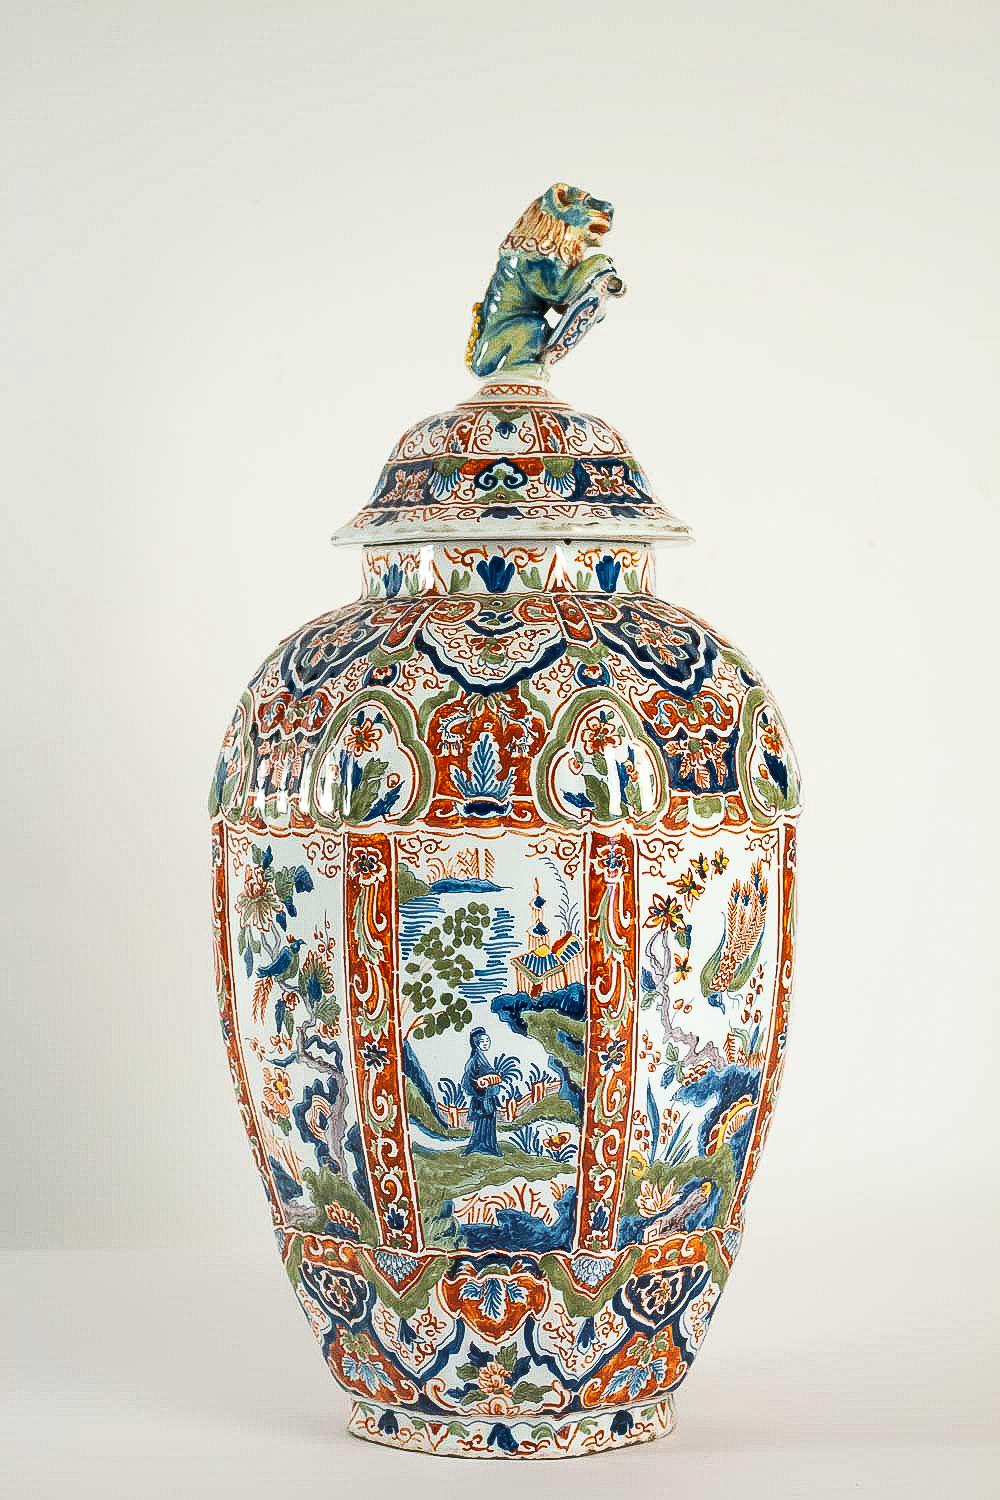 A beautiful and decorative large Delft faience polychrome vase, decorated with hand-painted stylized cashmere decoration, flowers, birds, opaque tin glazes that made in Delft 18th century.

Our vase is in excellent condition and signed in red color